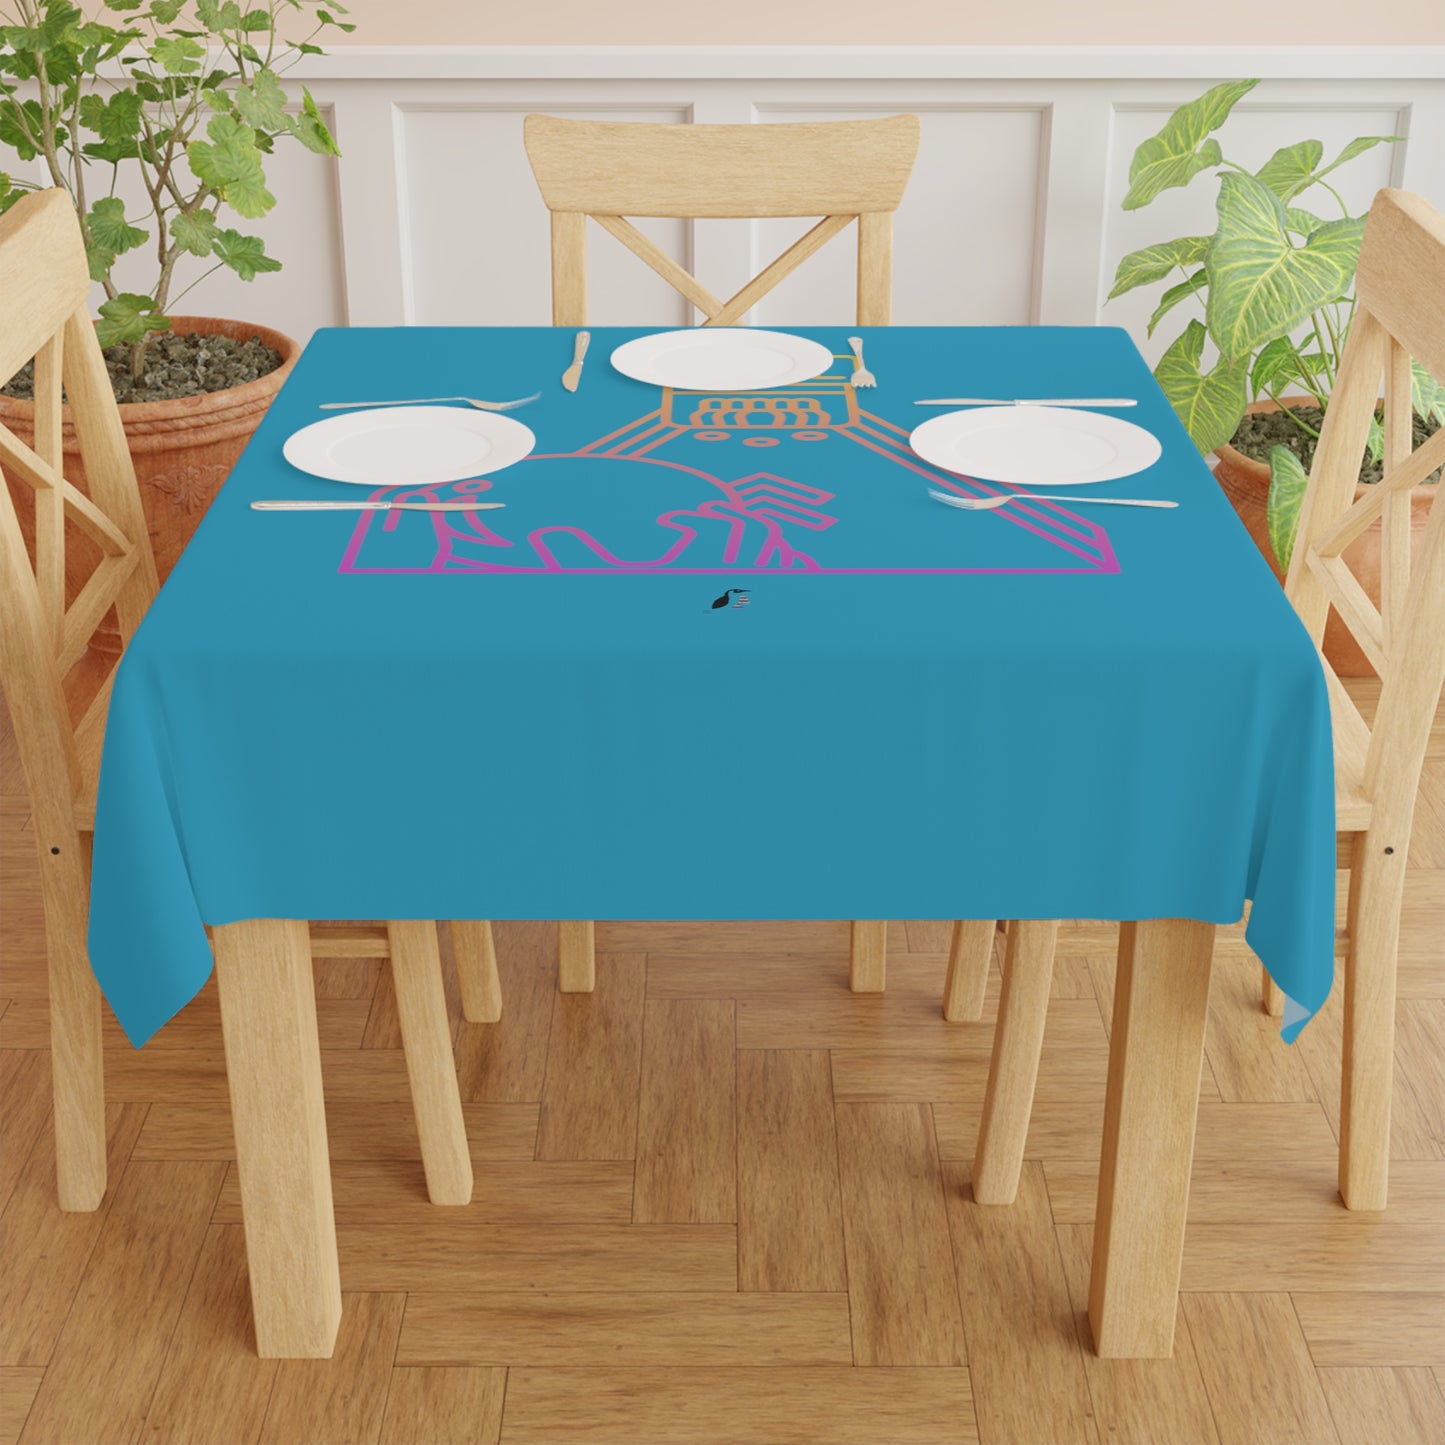 Tablecloth: Bowling Turquoise